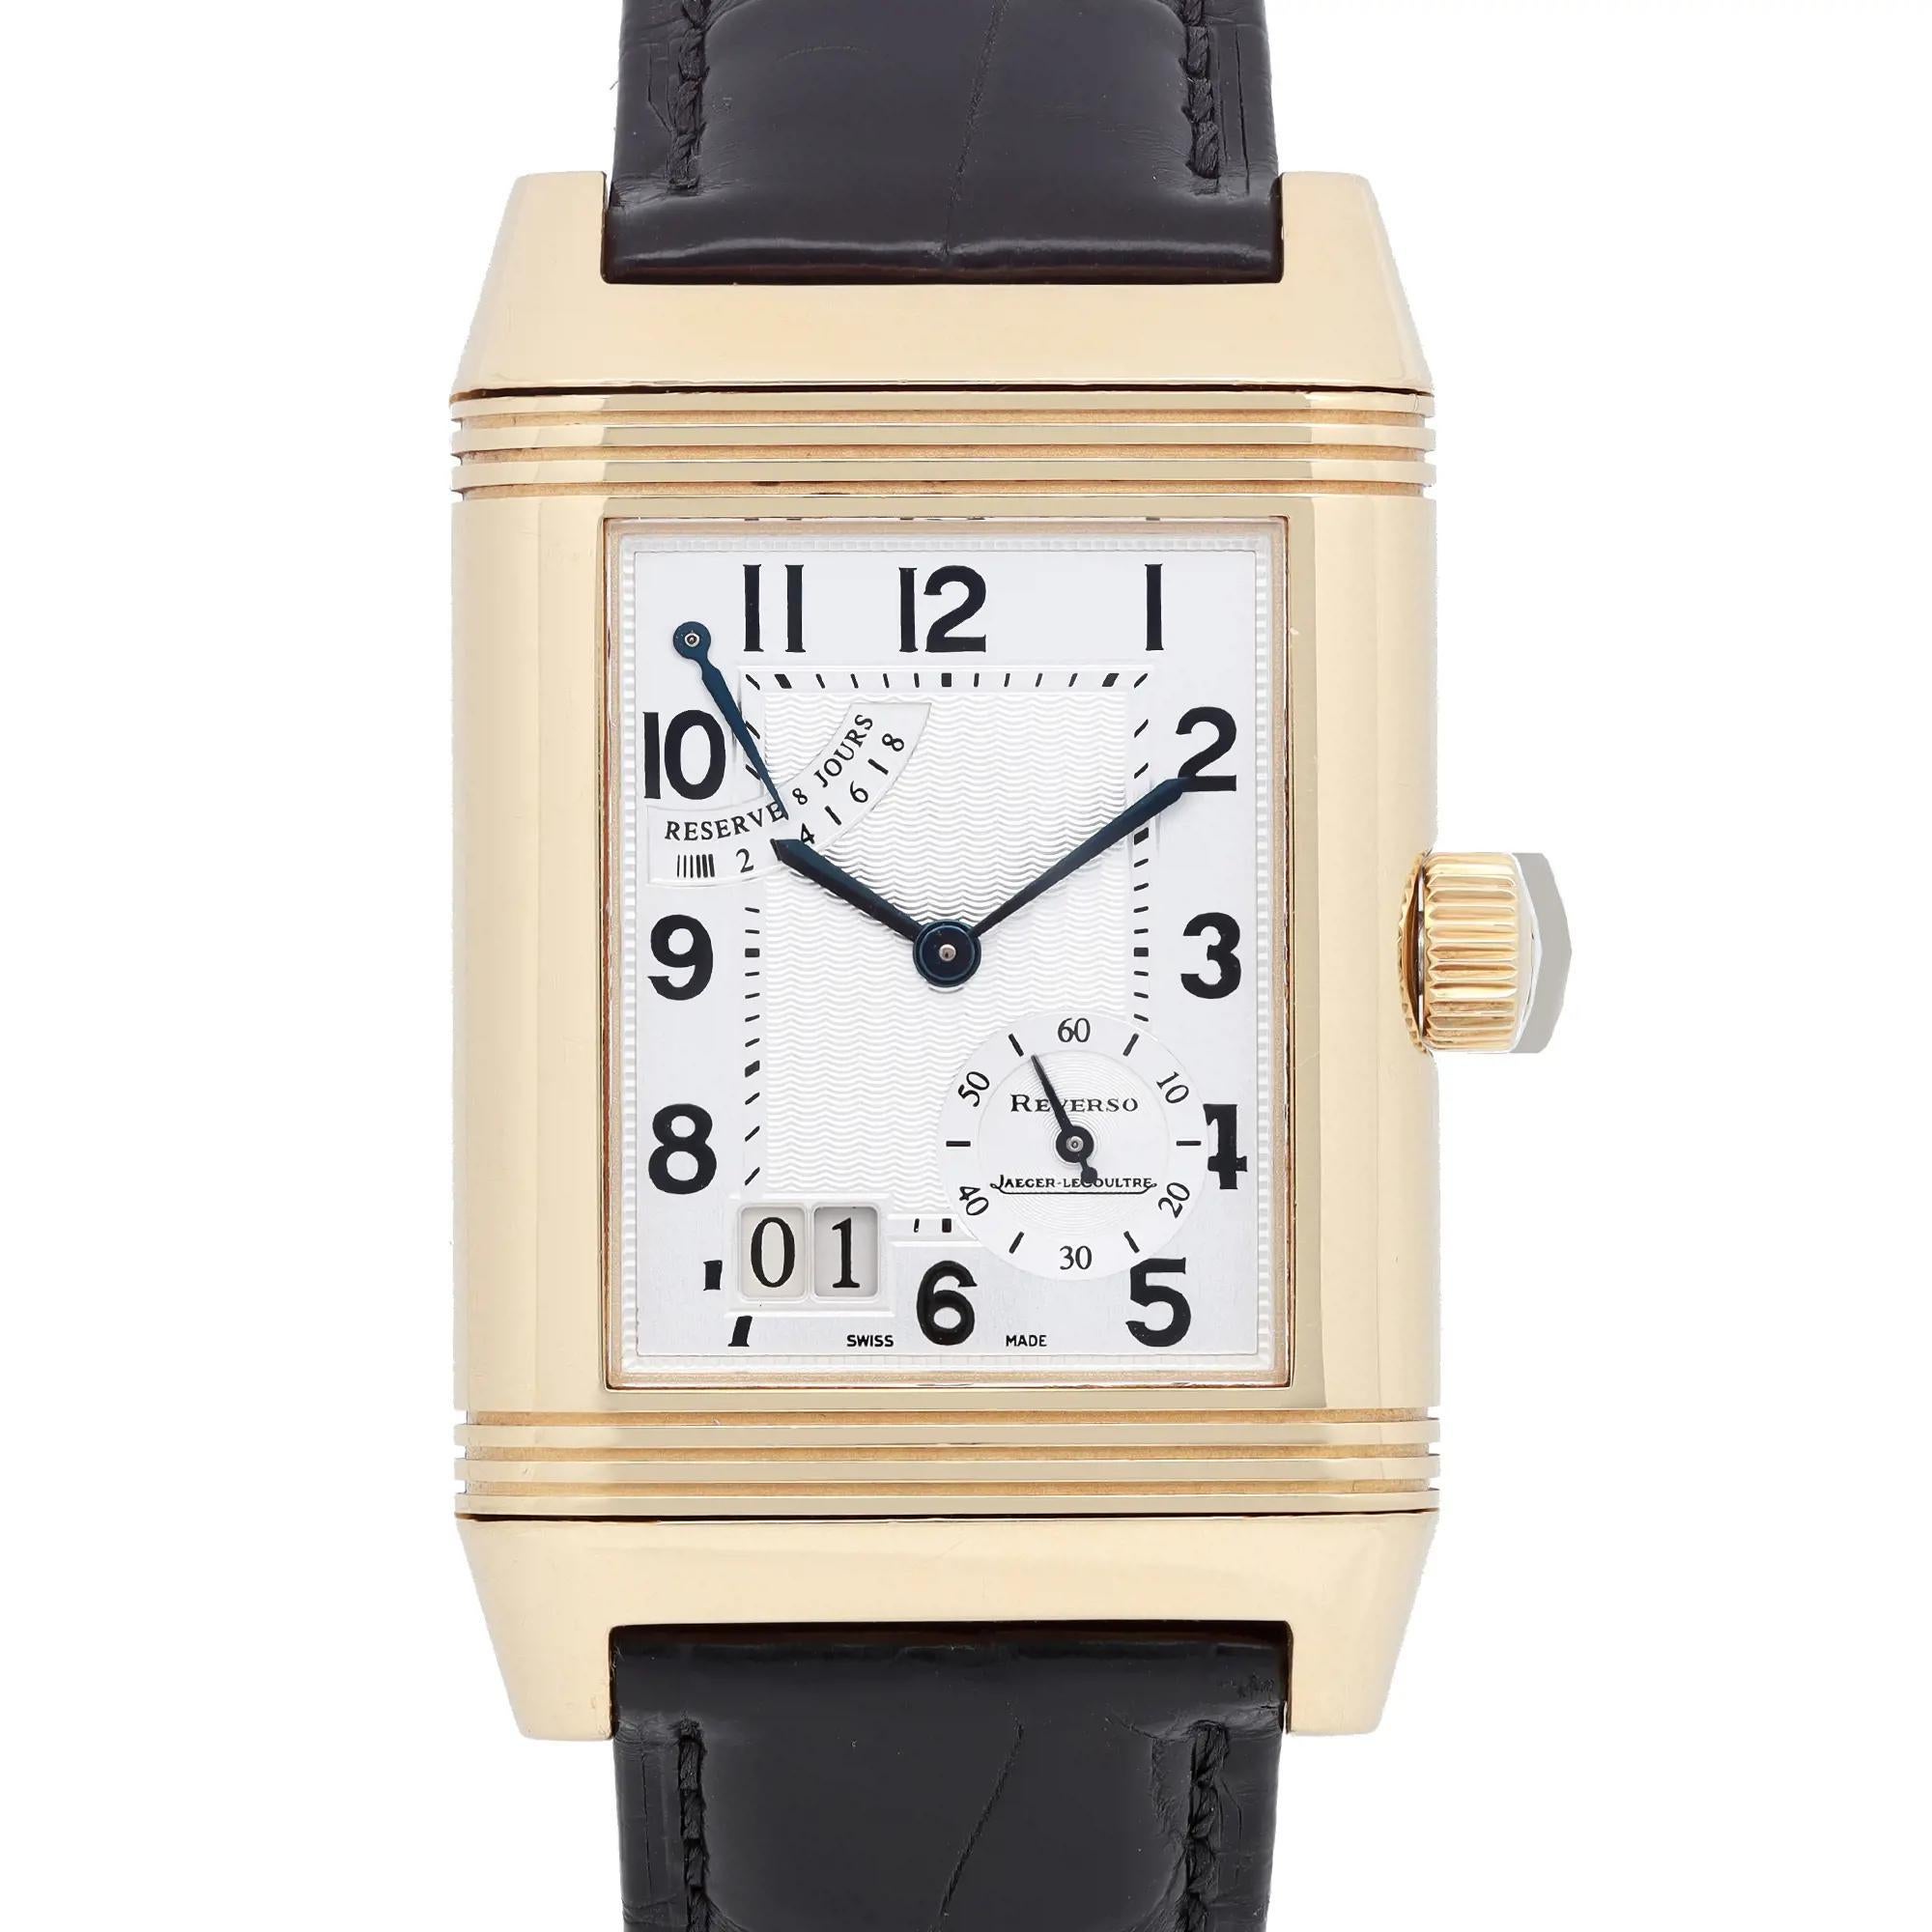 Pre-owned and in excellent condition. Reference No-240.1.15.  Aftermarket band. Rectangular rotating case. The original box and papers are not included. Covered by a 2-year Chronostore warranty.

Brand: Jaeger-LeCoultre  Type: Wristwatch 